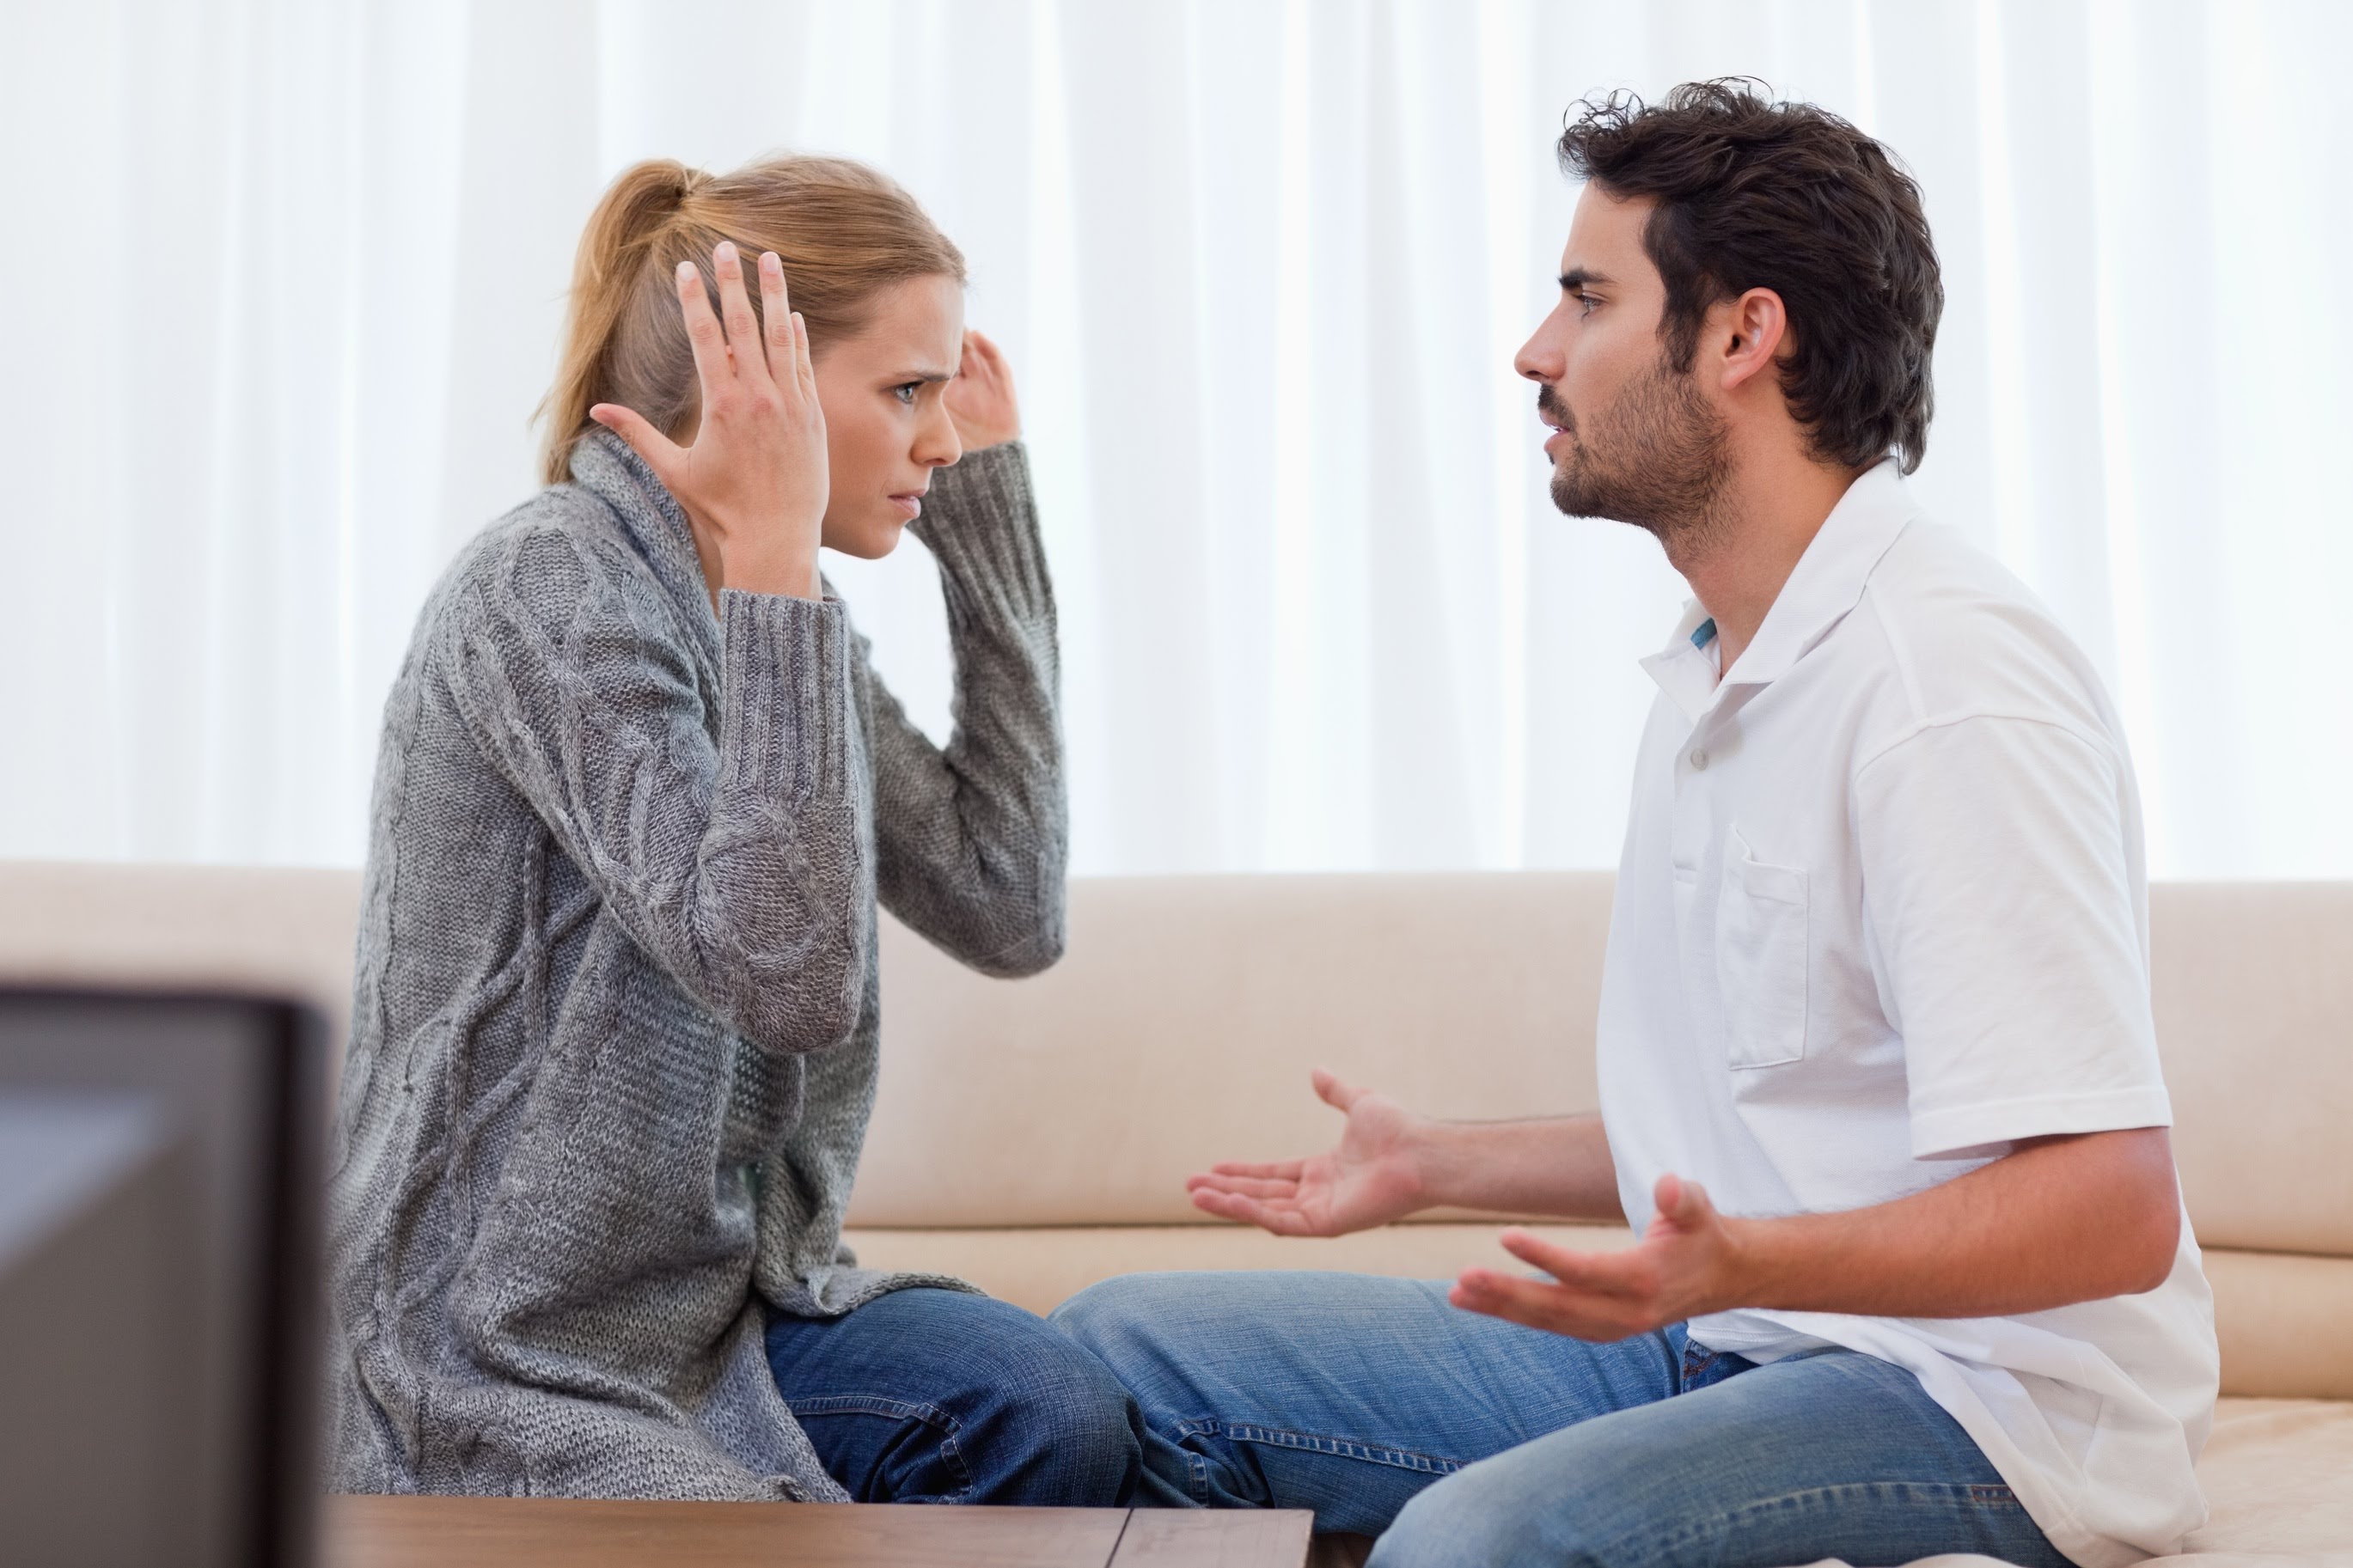 Be honest about debts when entering into a relationship, or this will happen a lot